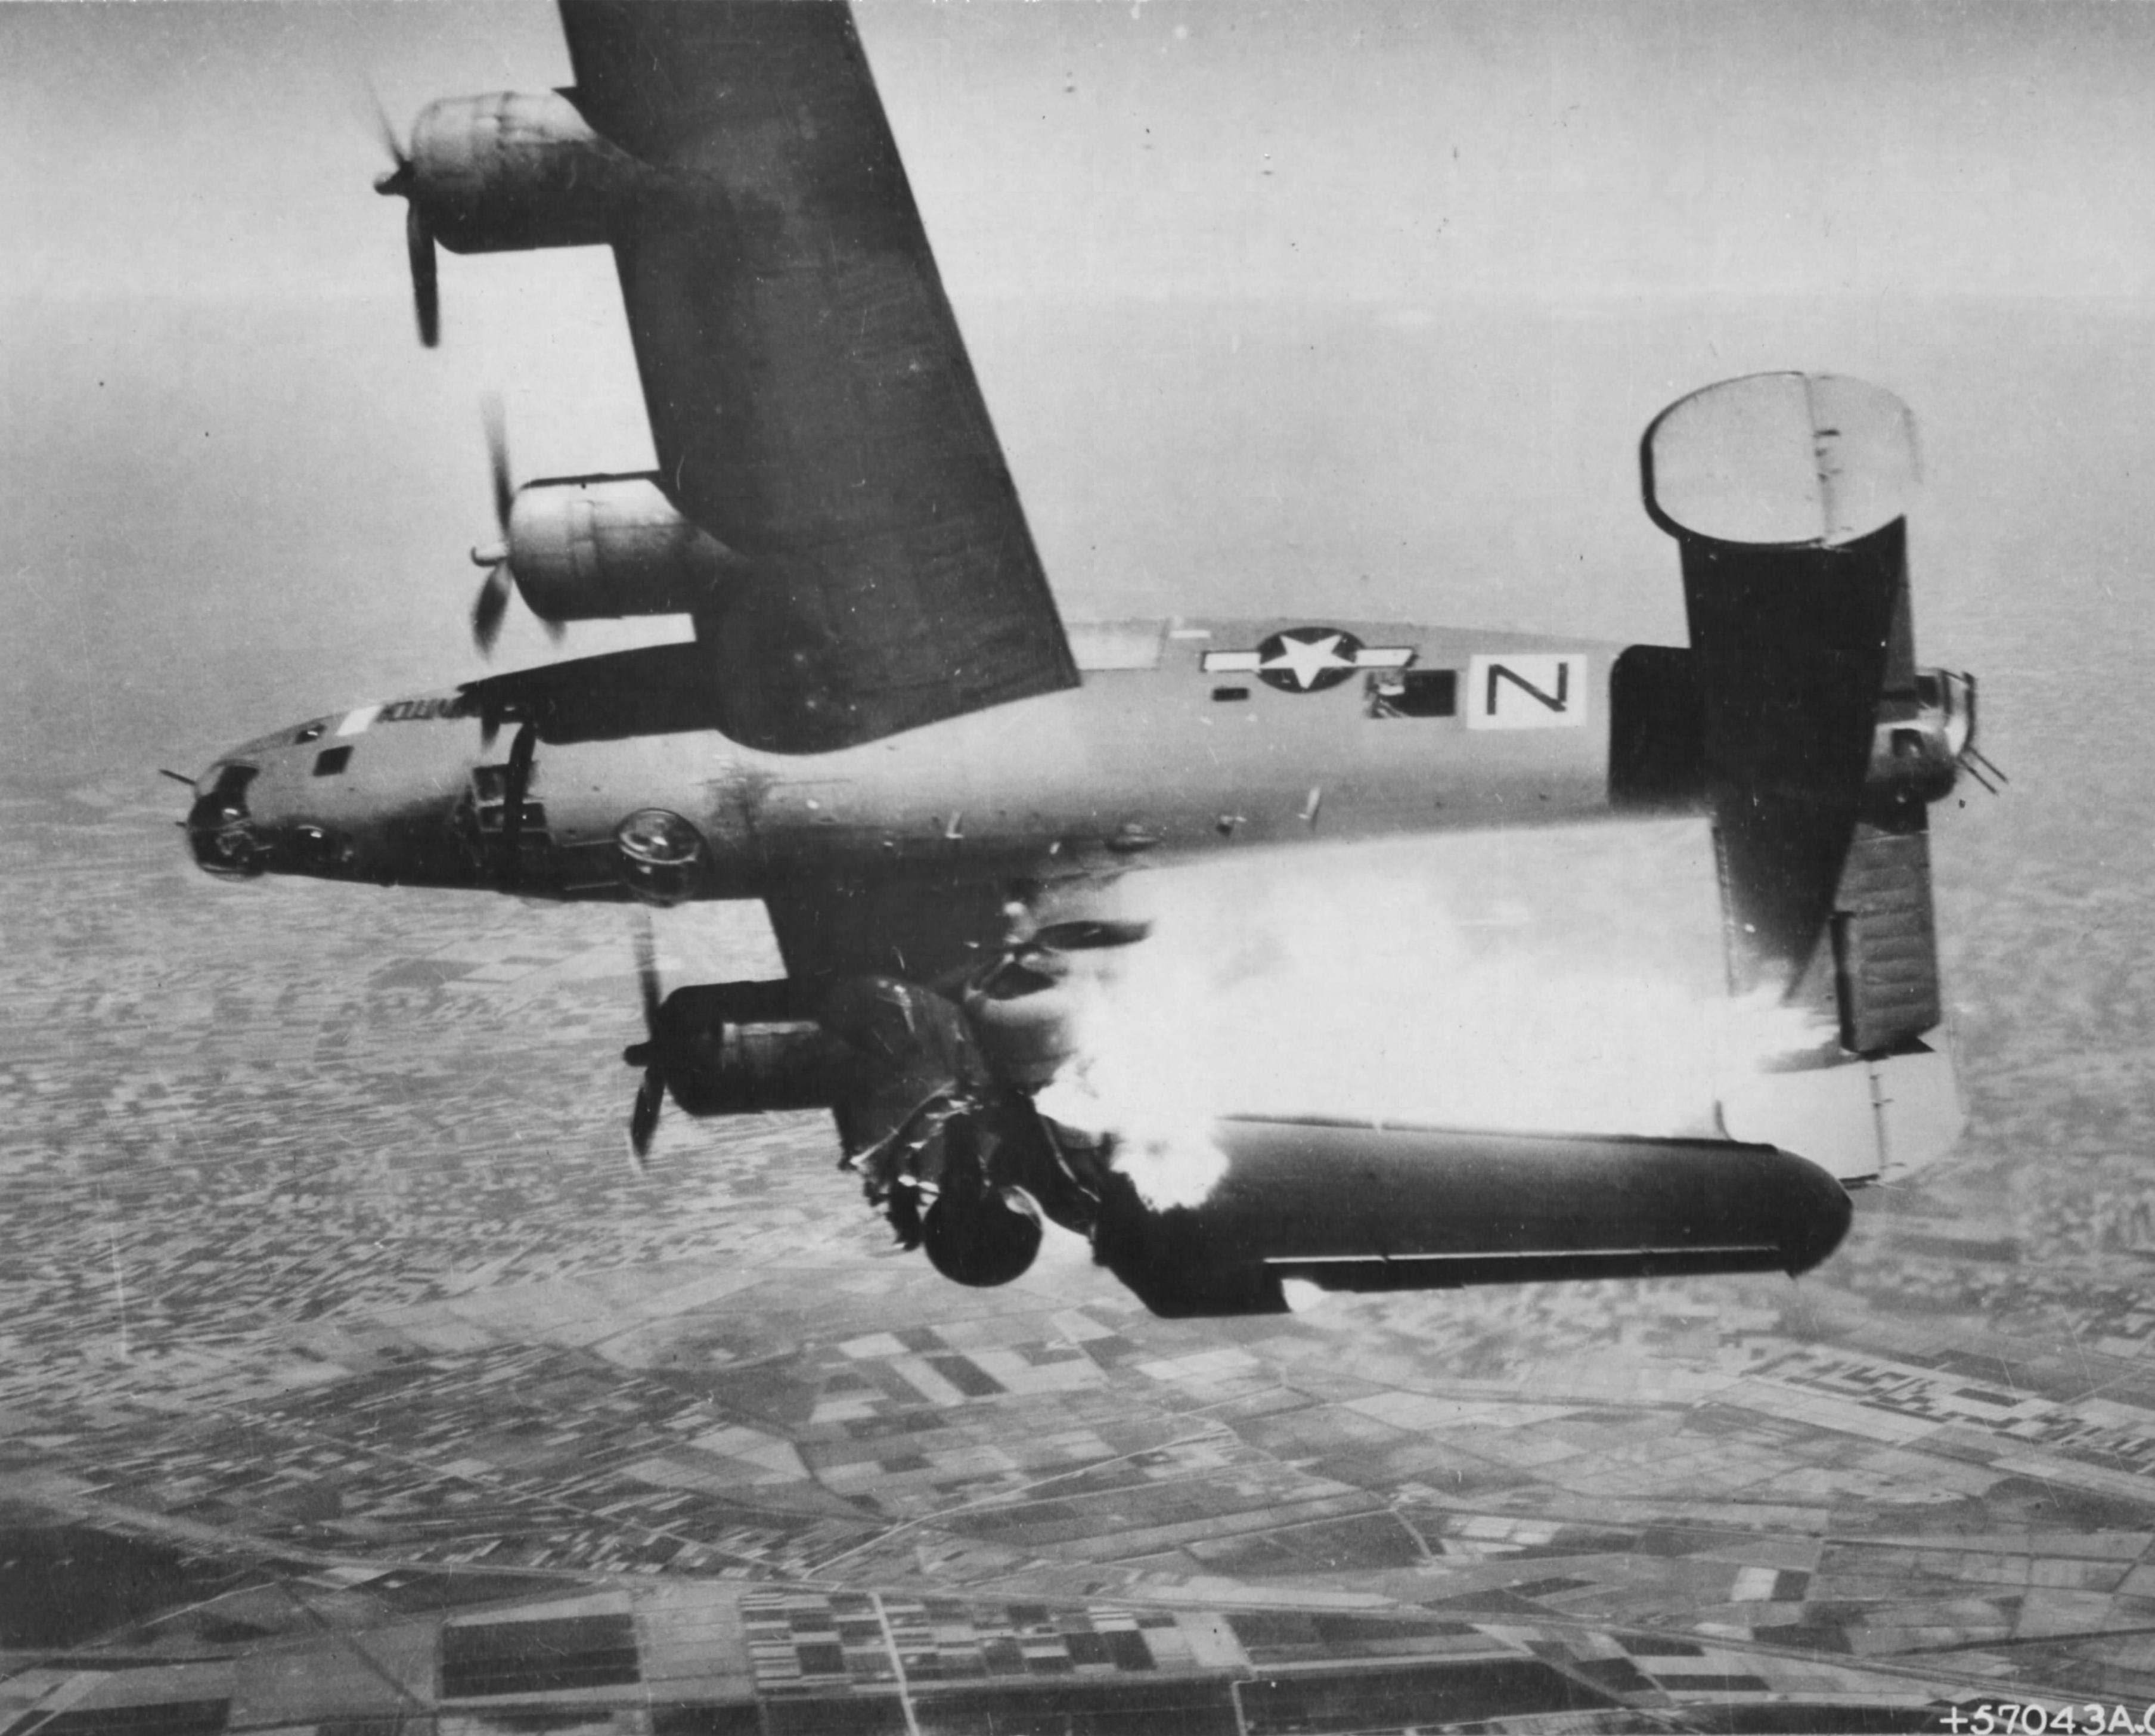 B-24L 'Stevonovitch II' of the of the 464th Bomber Group hit by German anti-aircraft fire over Lugo, Italy, 10 Apr 1945; out of the crew of 10 only 1, the bombardier, survived.